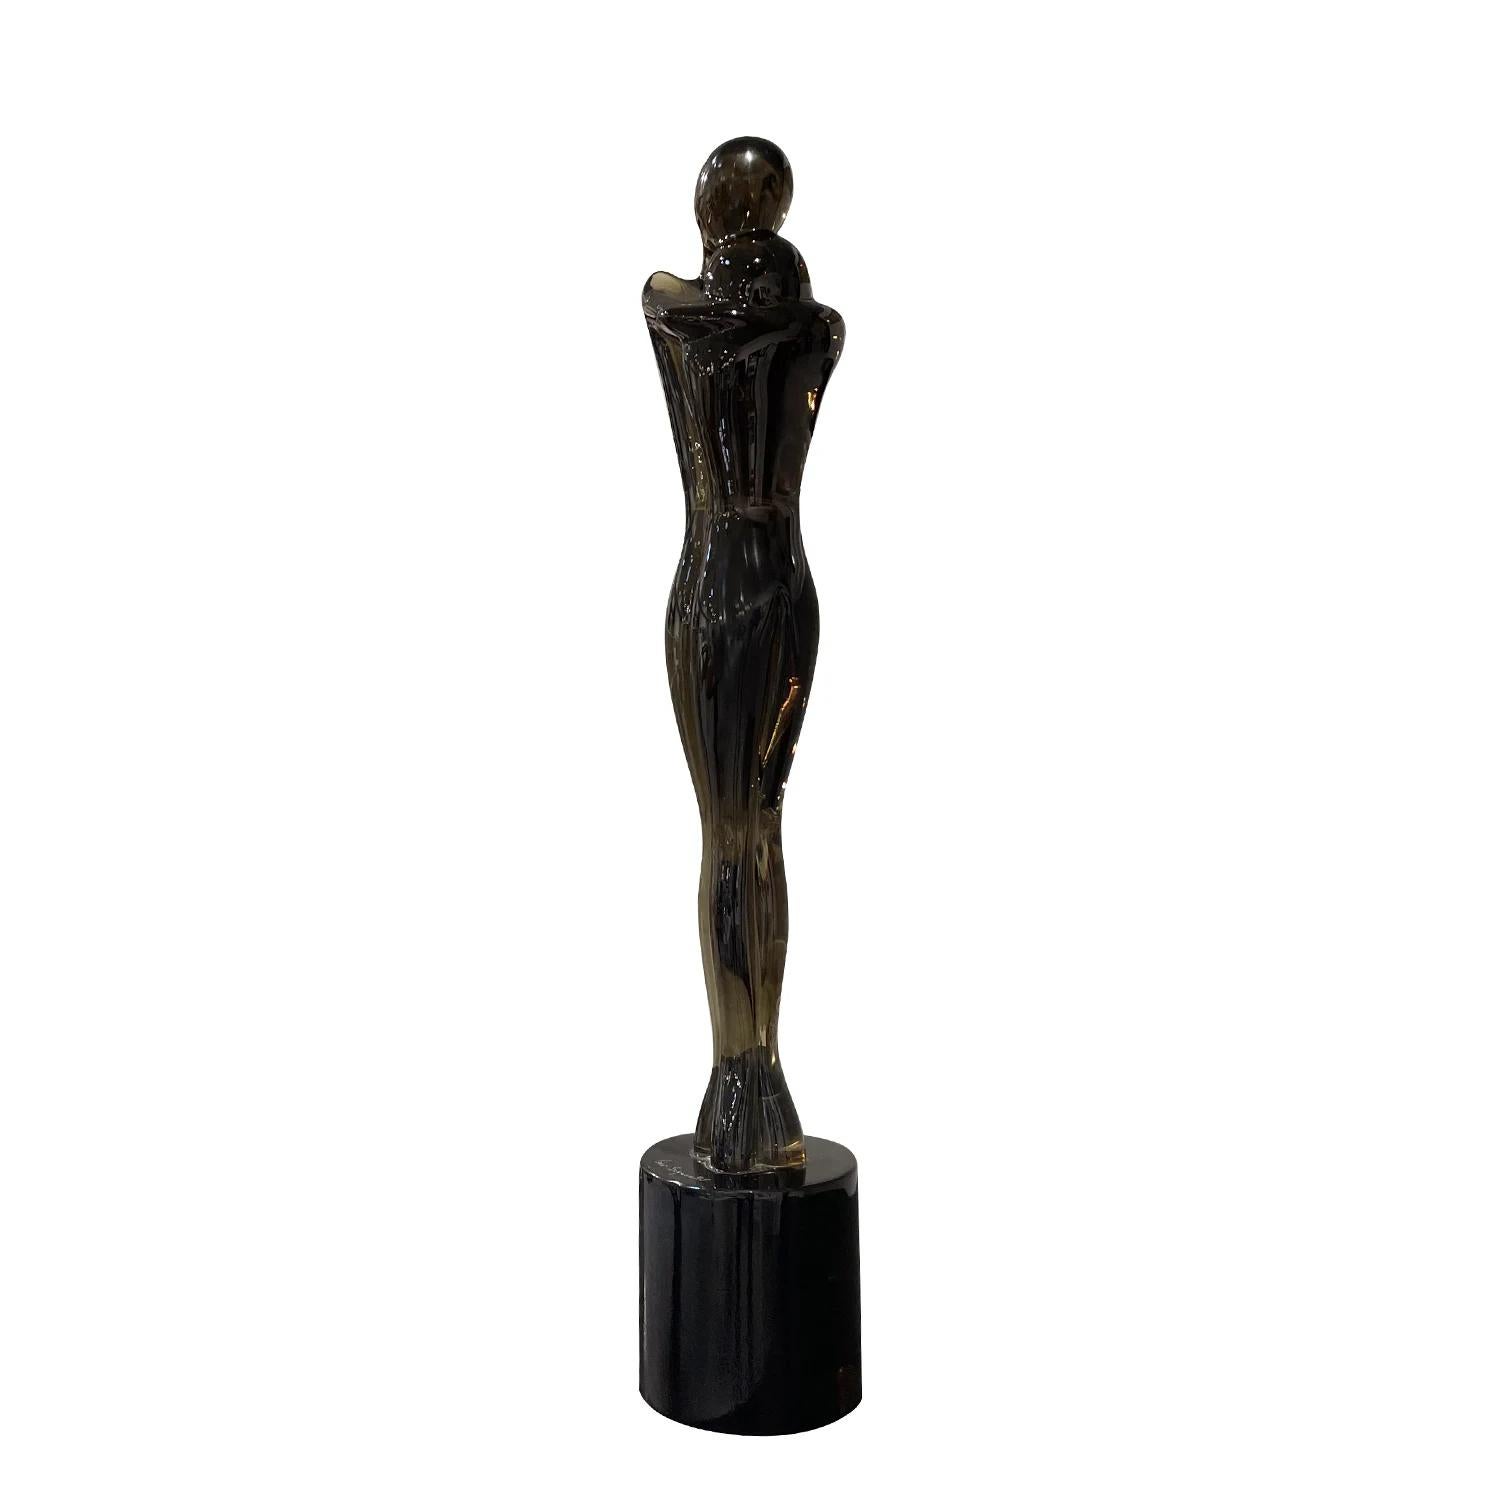 A vintage Mid-Century Modern Italian large sculpture of a hugging, loving couple made of hand blown smoked Murano glass, designed by Pino Signoretto in good condition. The detailed décor piece is resting on a round black base, representing a woman